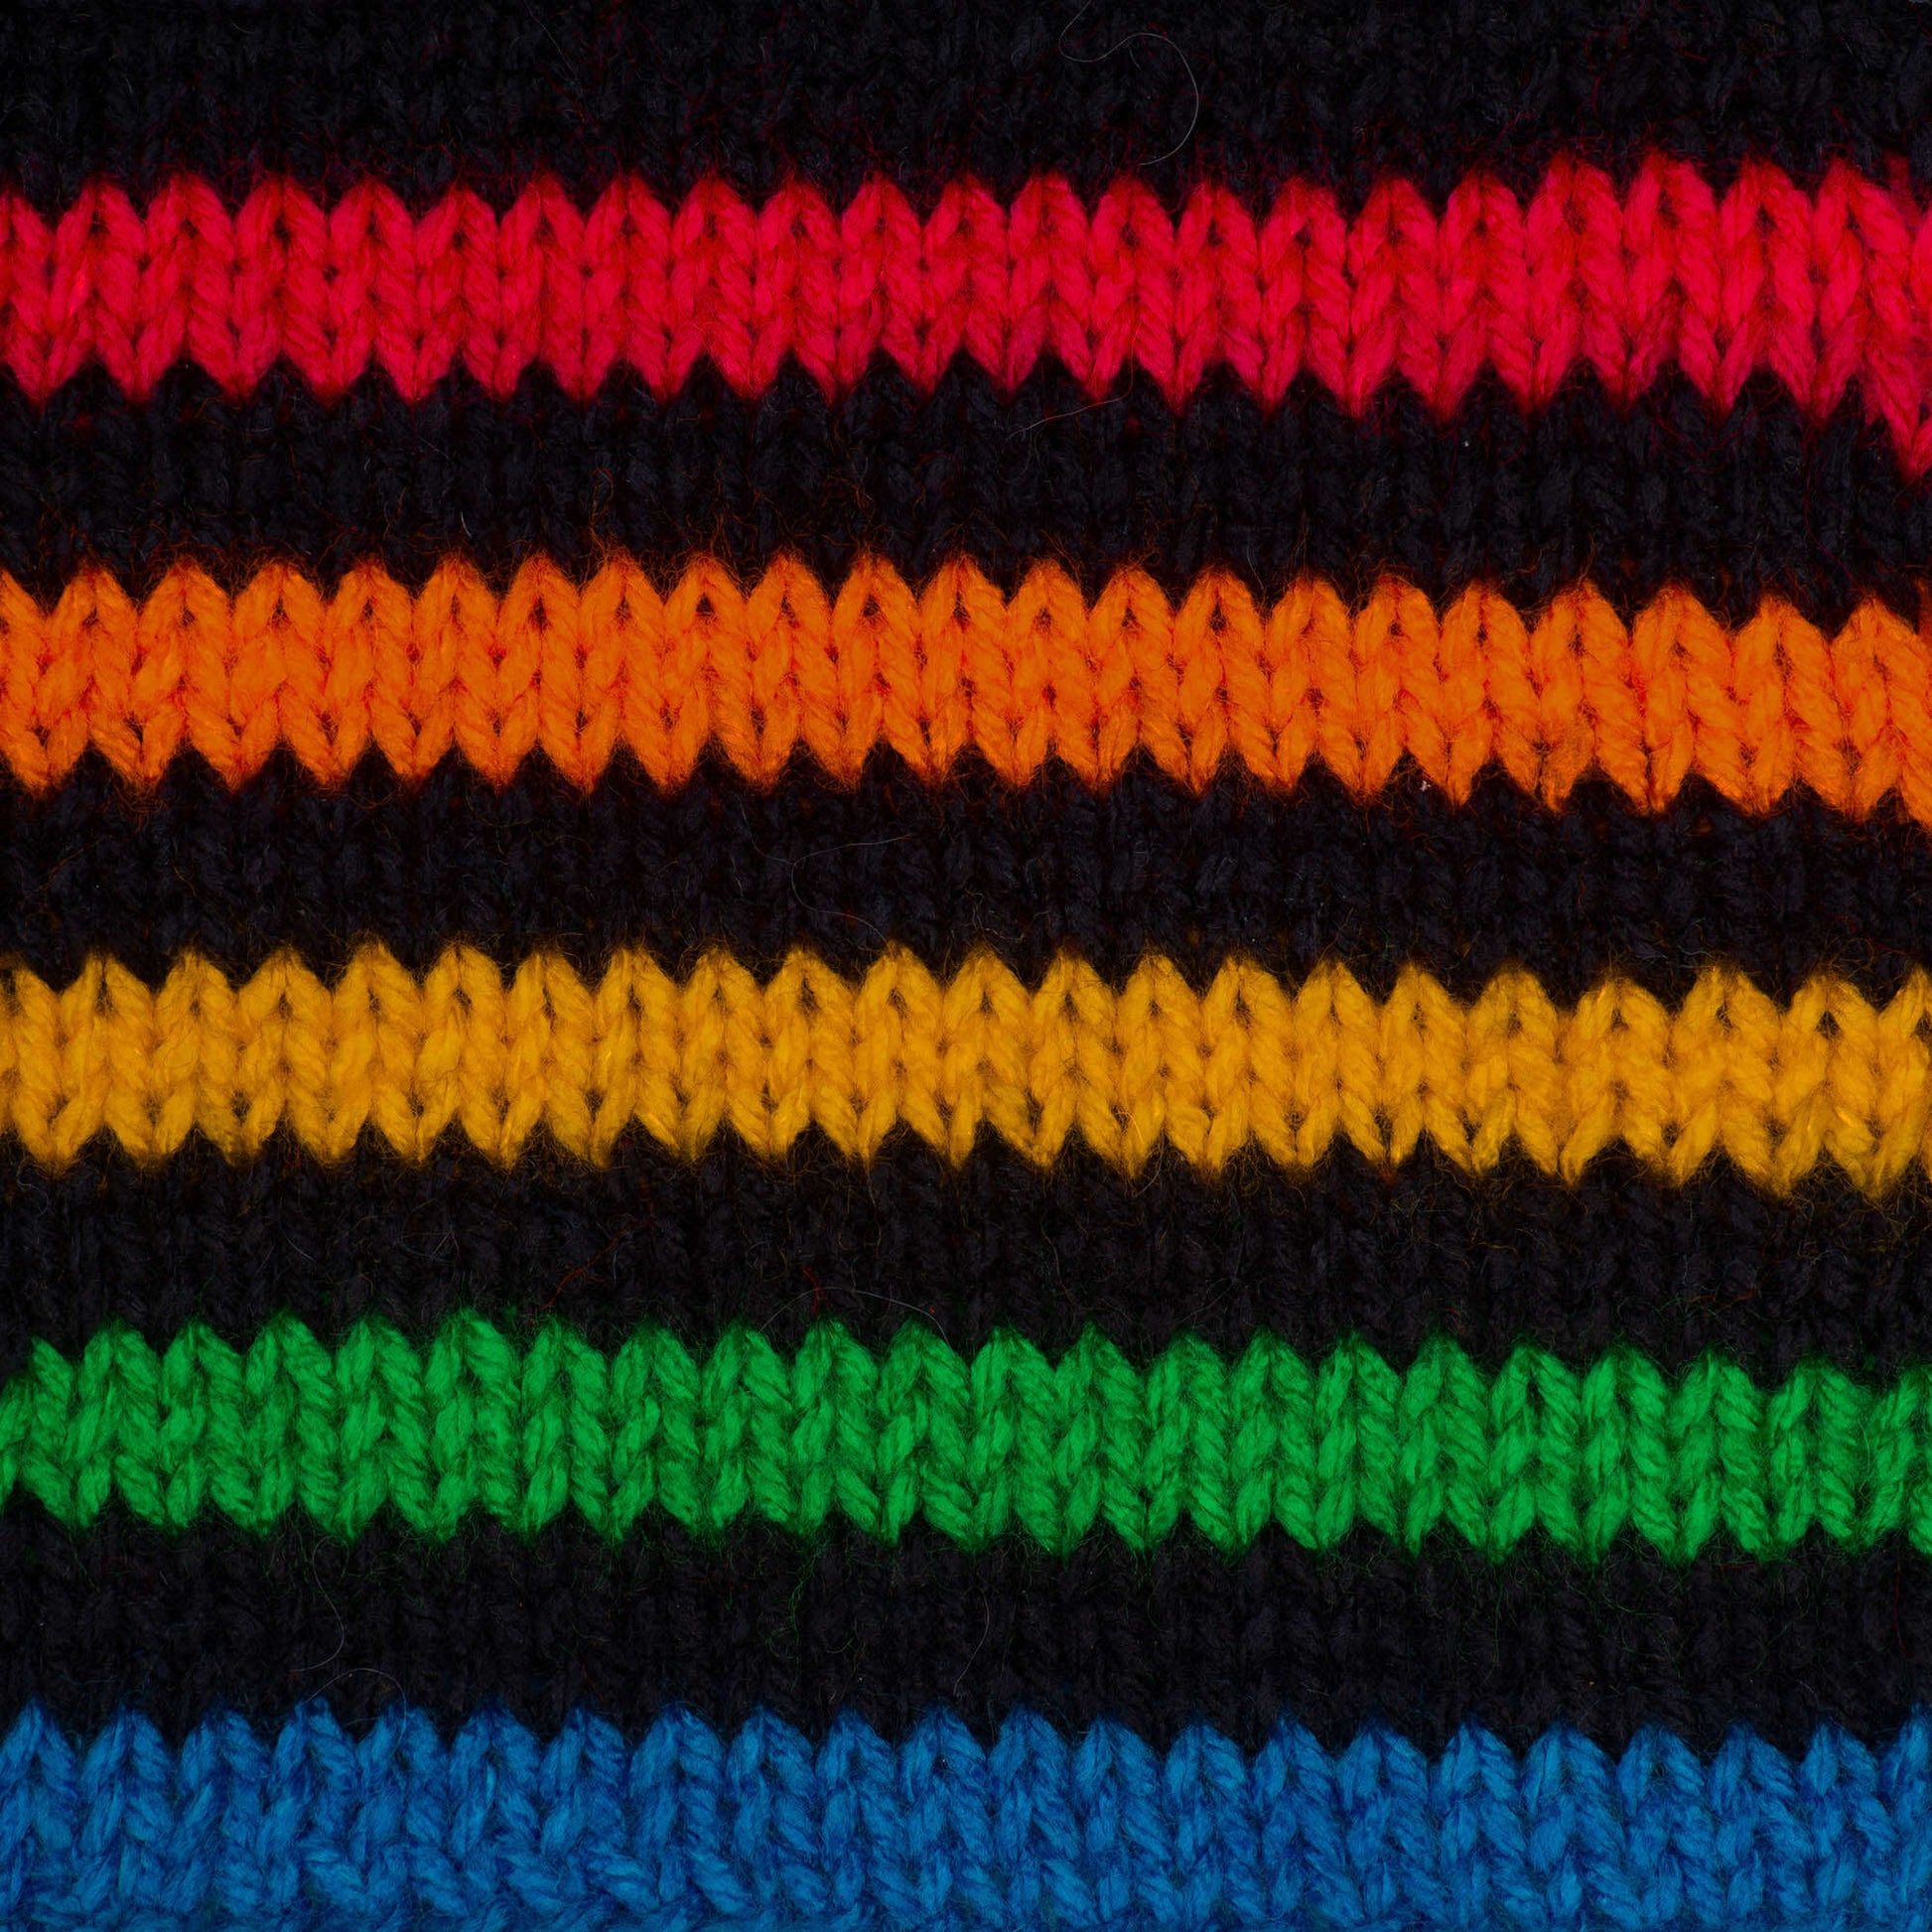 Red Heart Super Saver Yarn Primary Stripes